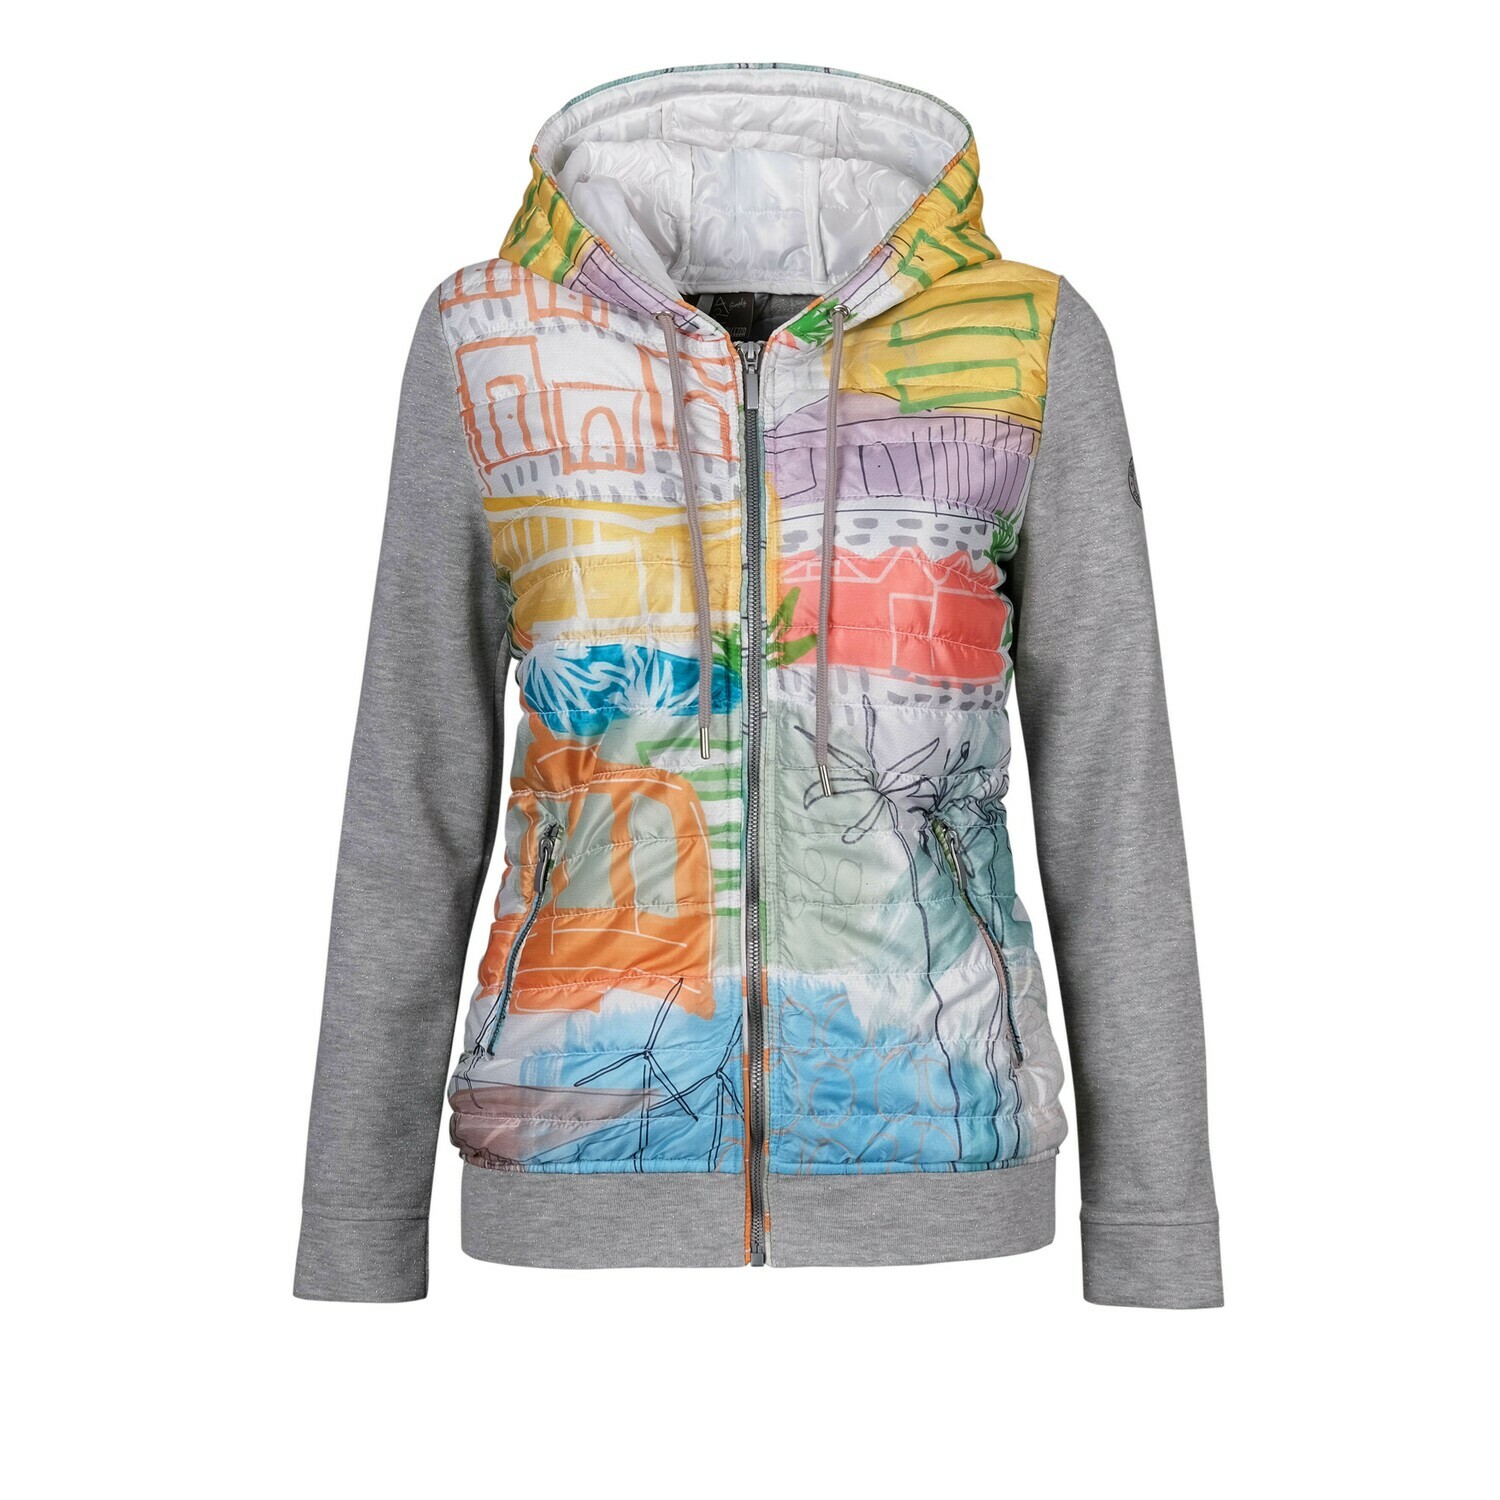 Simply Art Dolcezza: Palm Springs Cityscape Abstract Art Puff Hoodie Jacket SOLD OUT